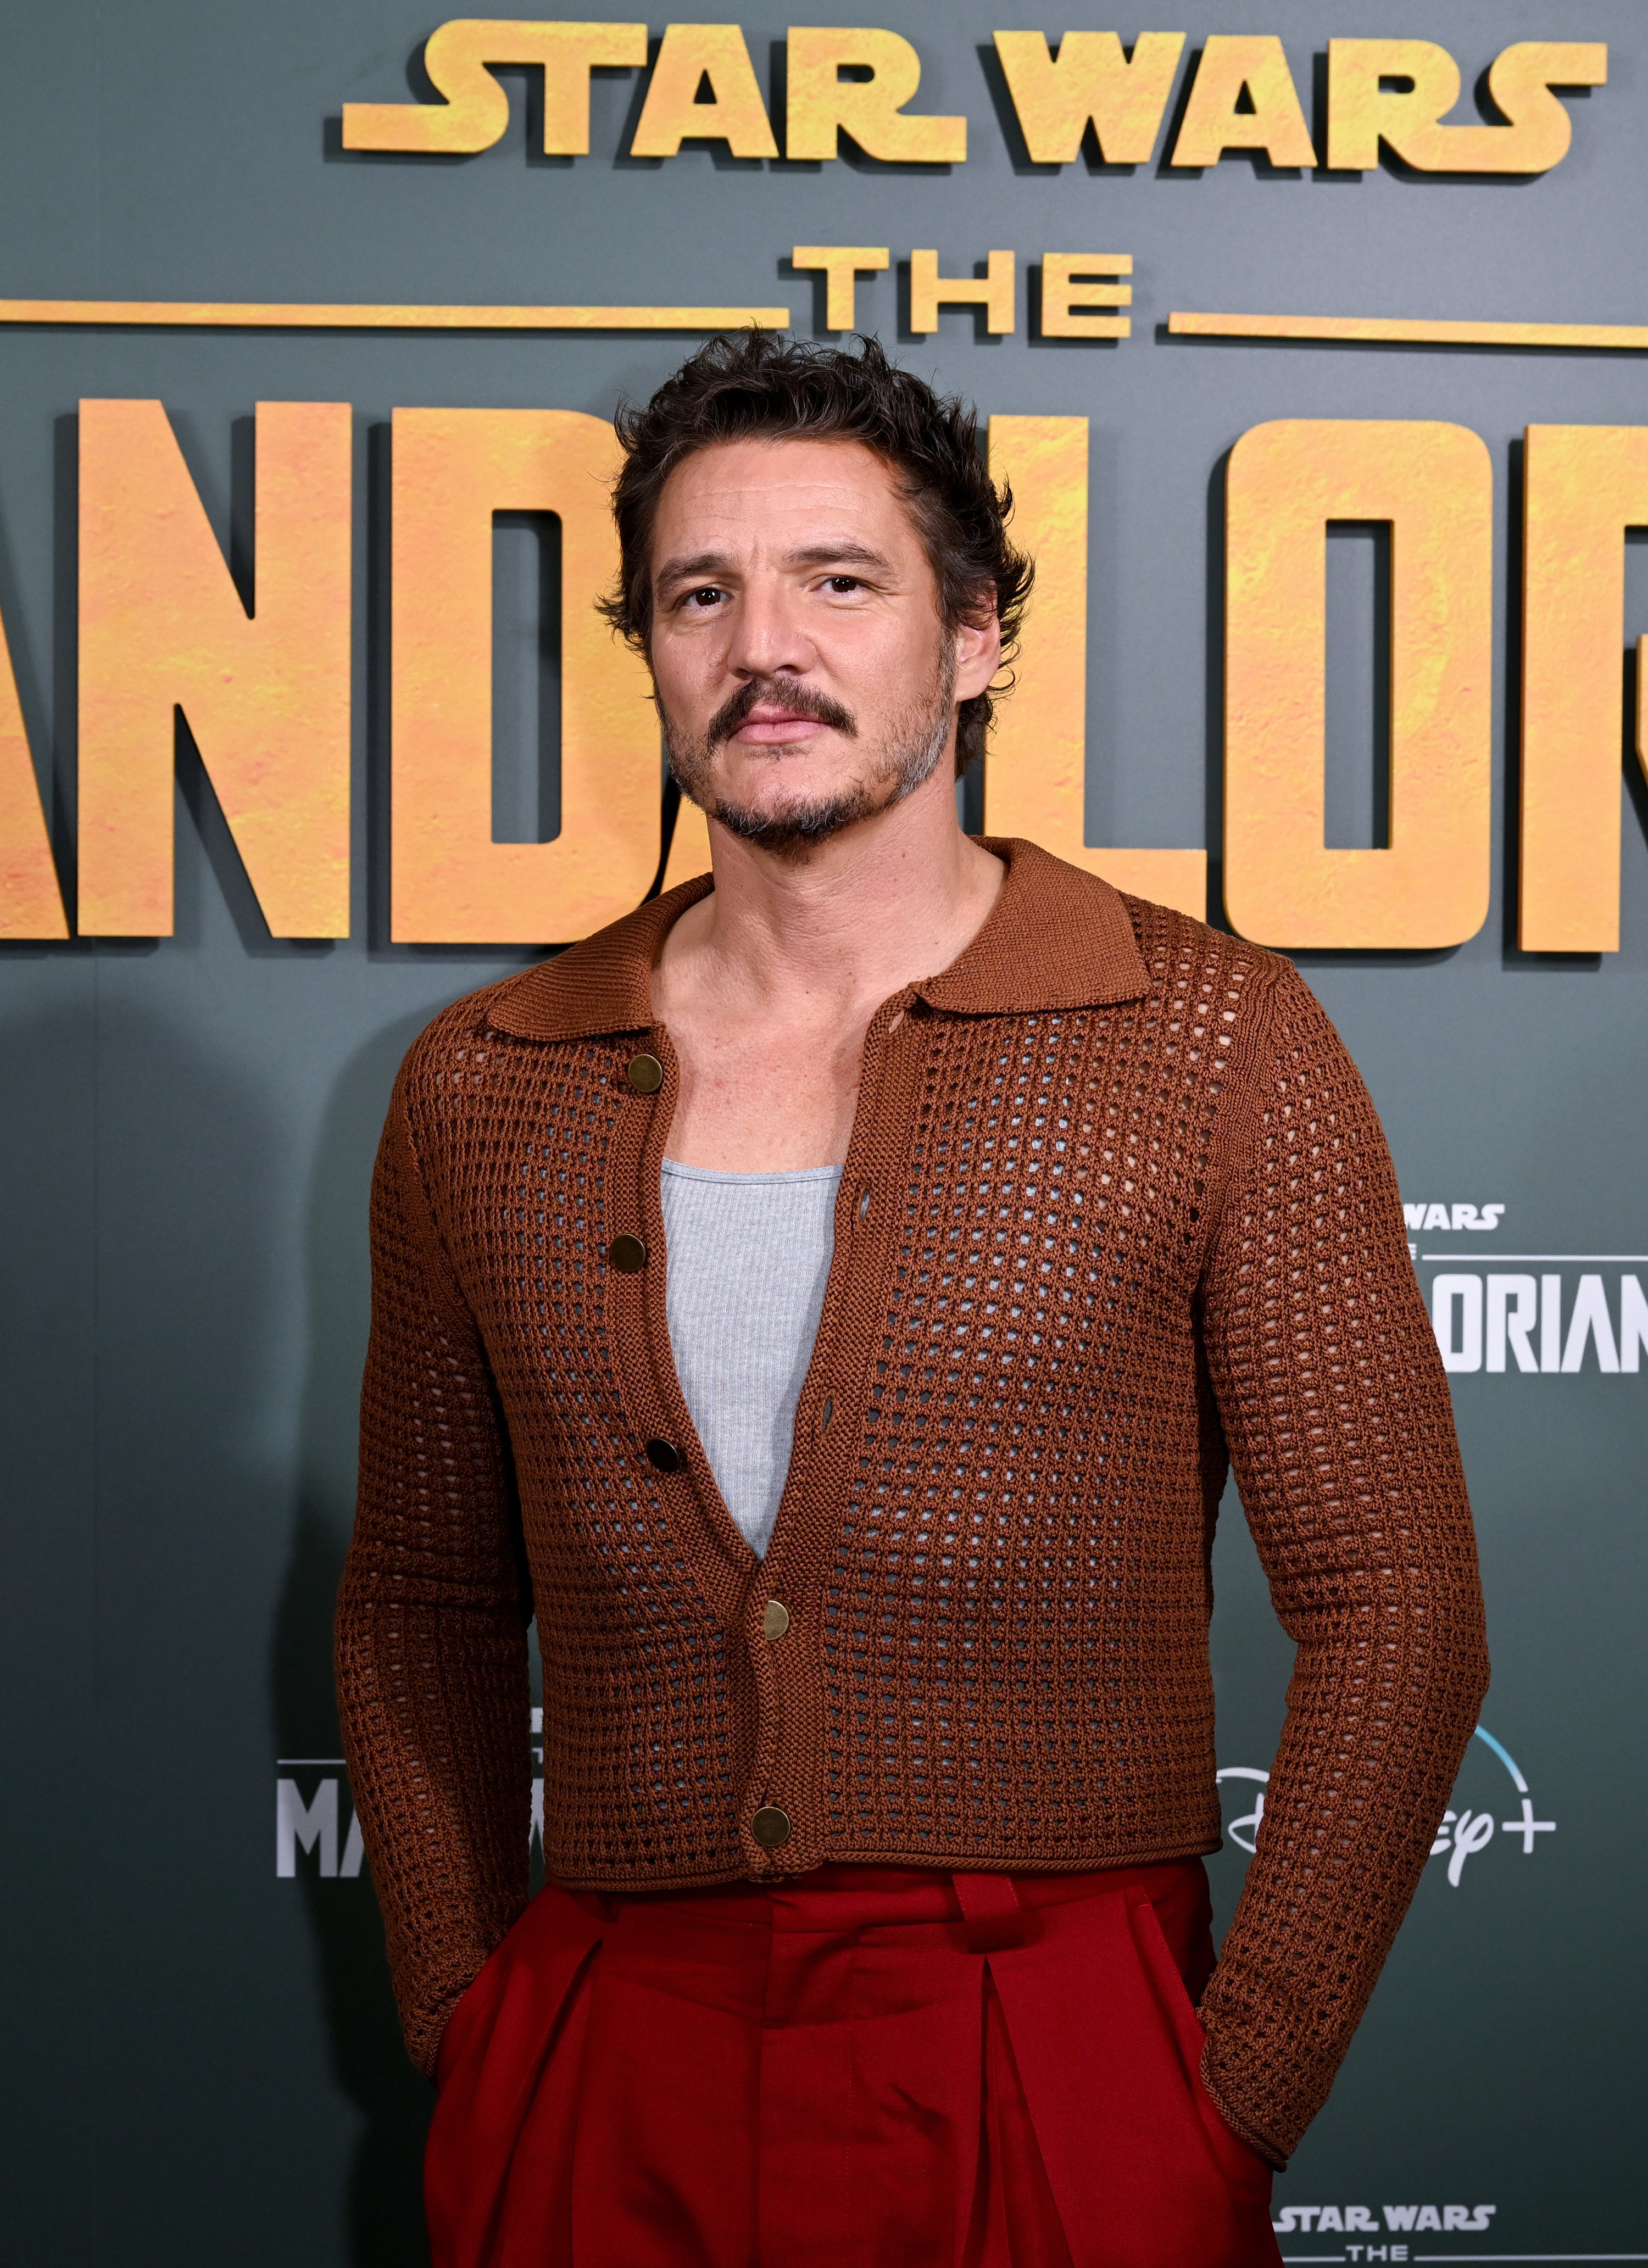 Pedro at a red carpet event for The Mandolorian